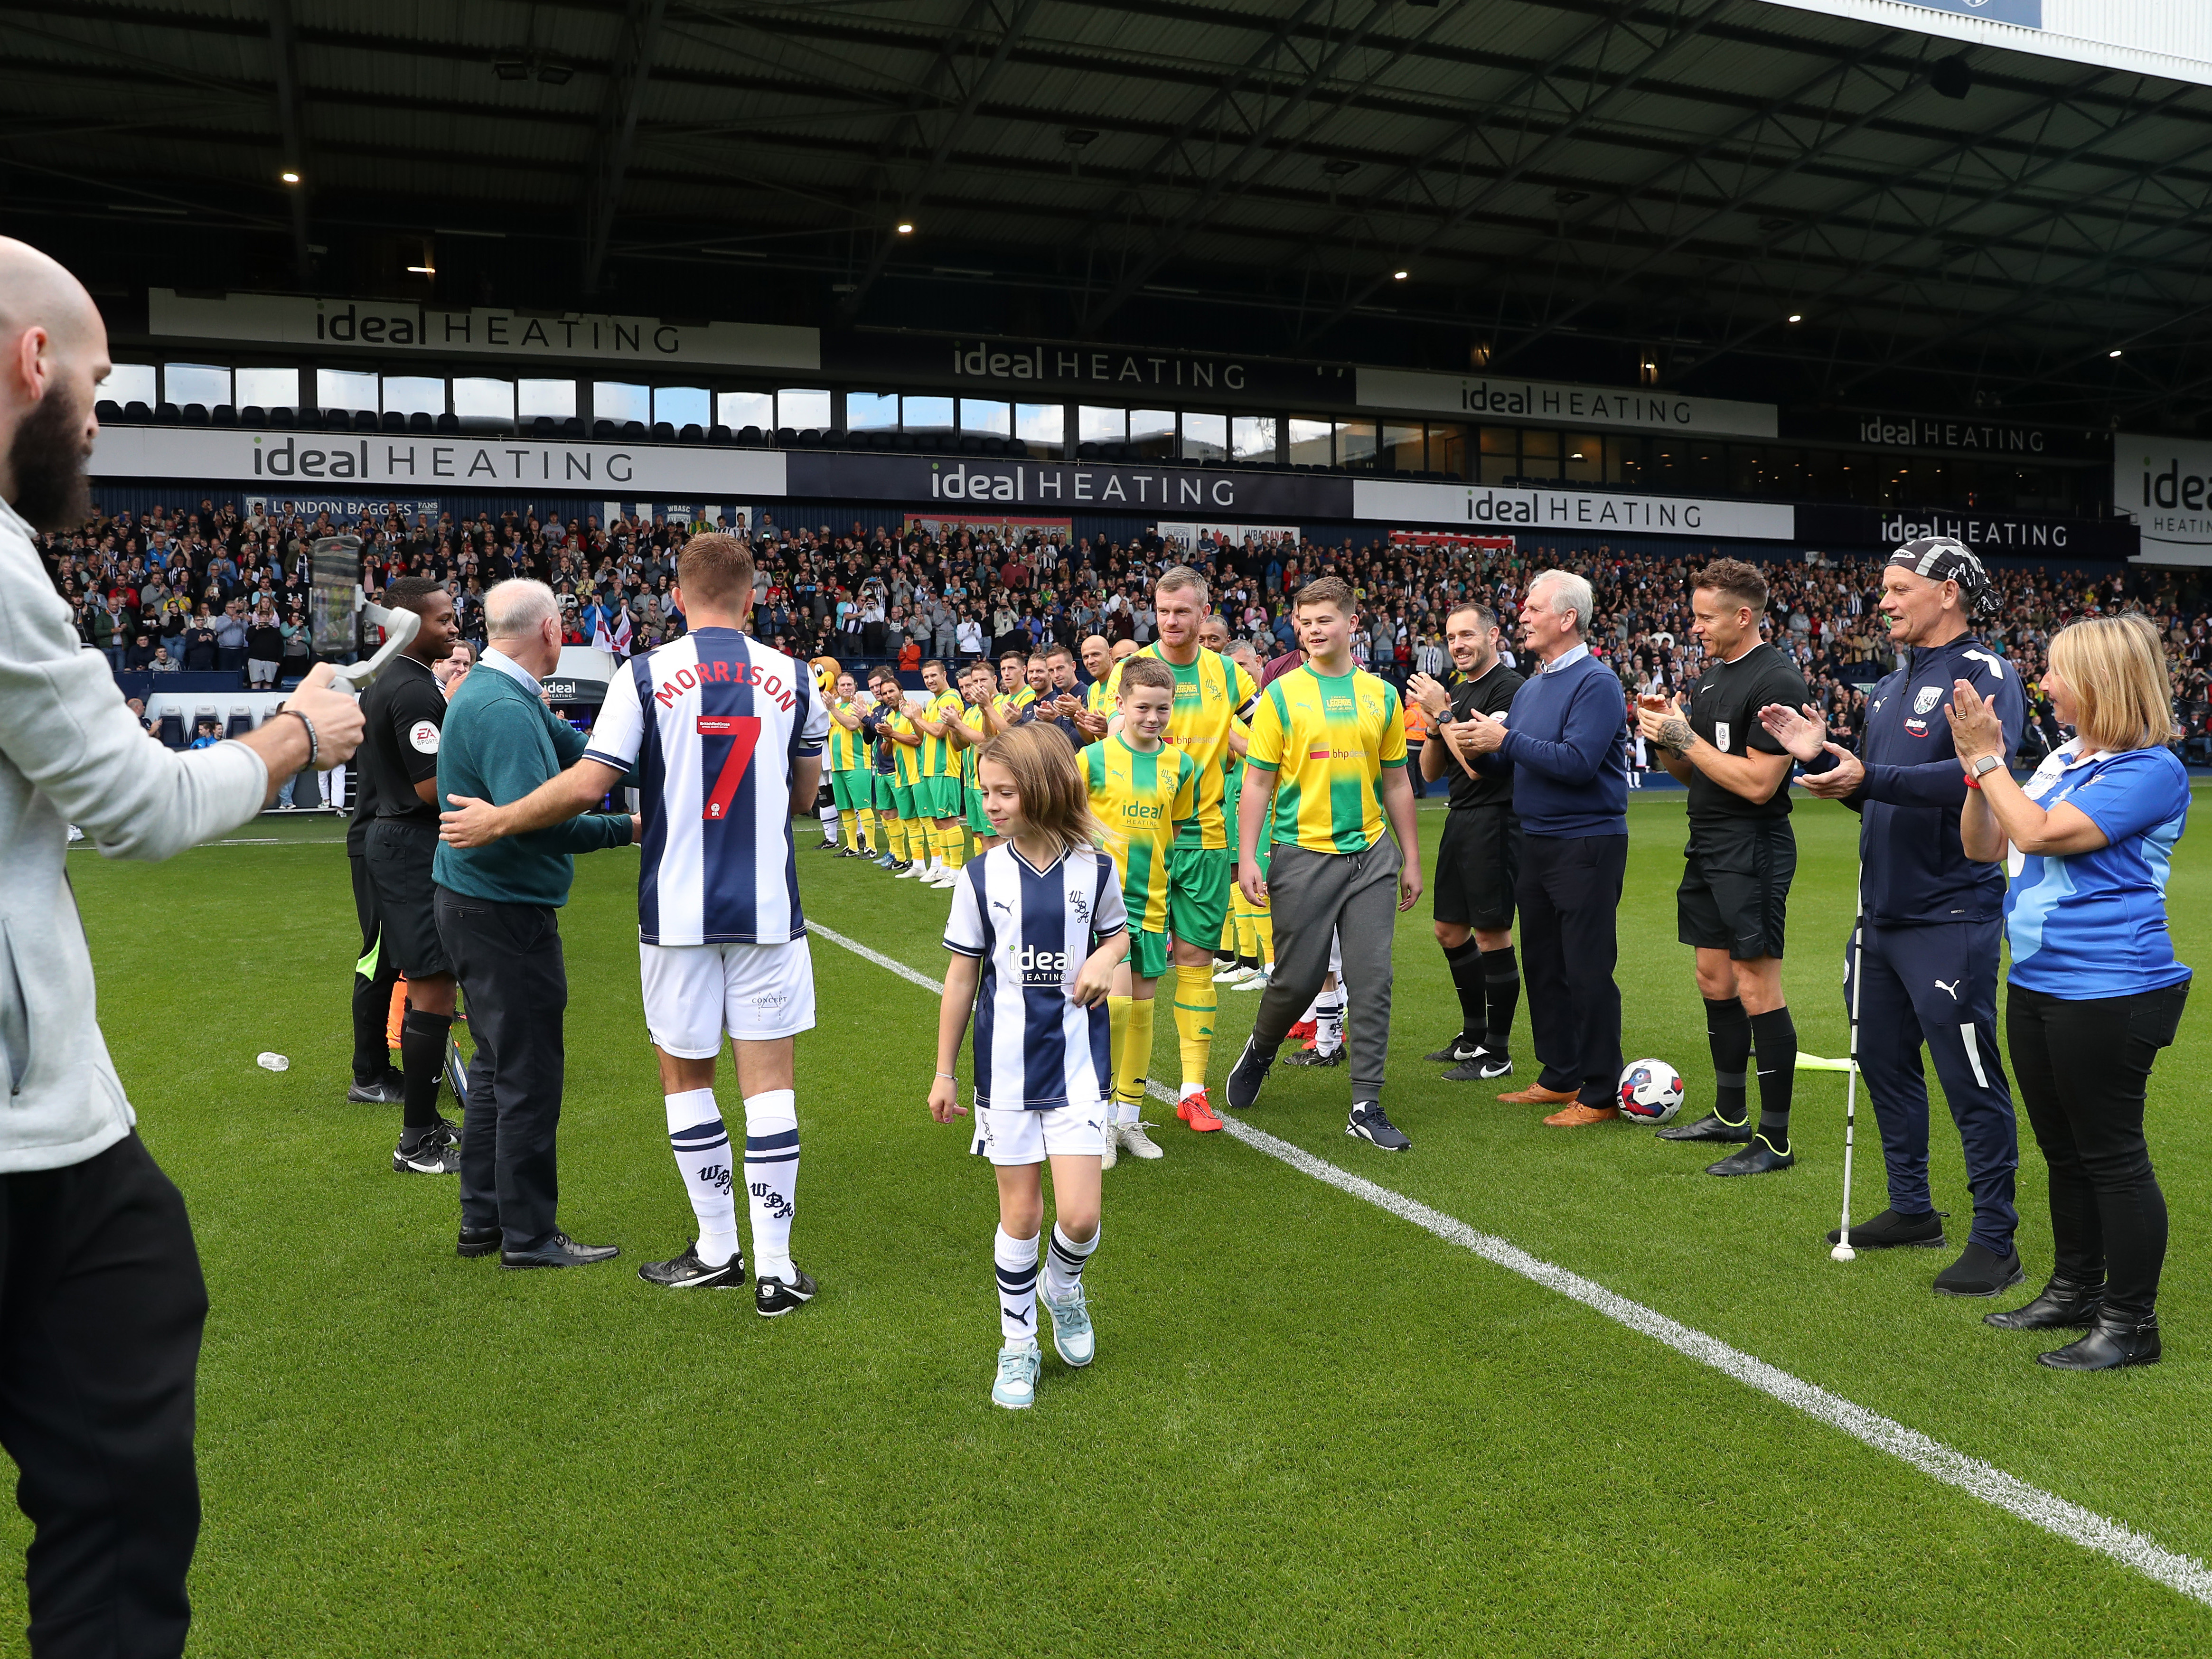 Players on the pitch at The Hawthorns before the 'Clash of the Legends'